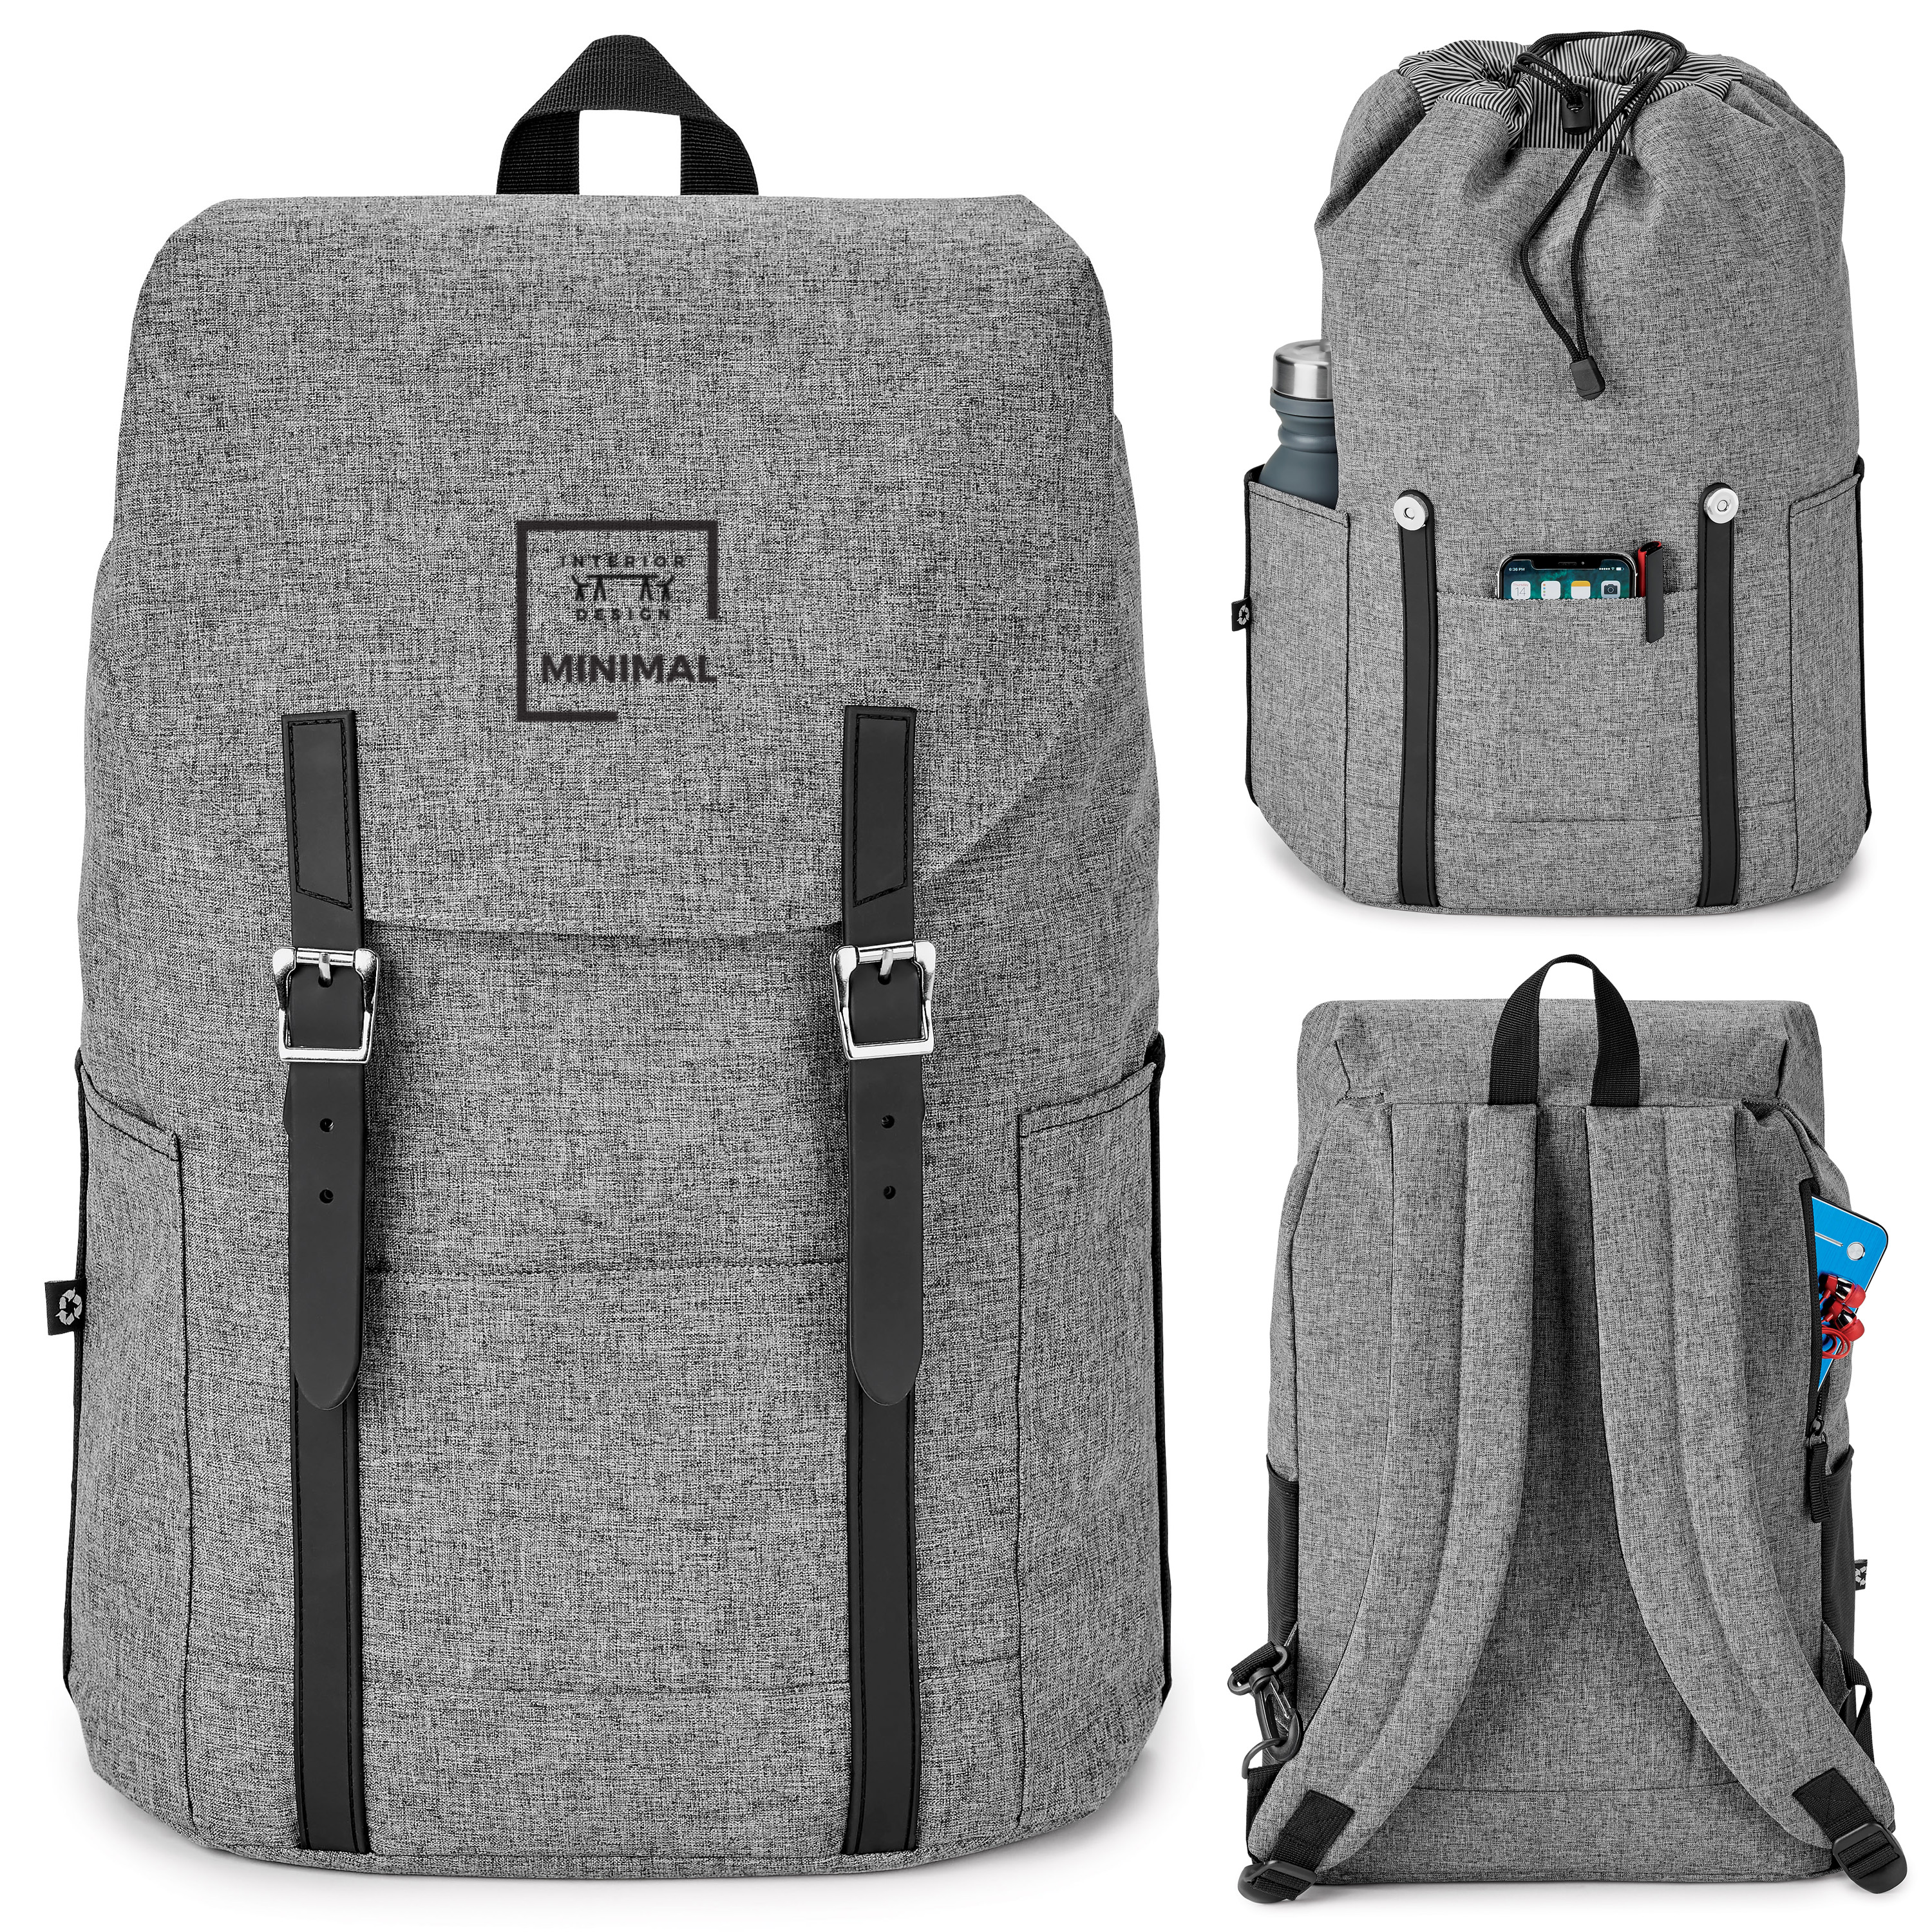 Recycled Flip Top Backpack | 17x12